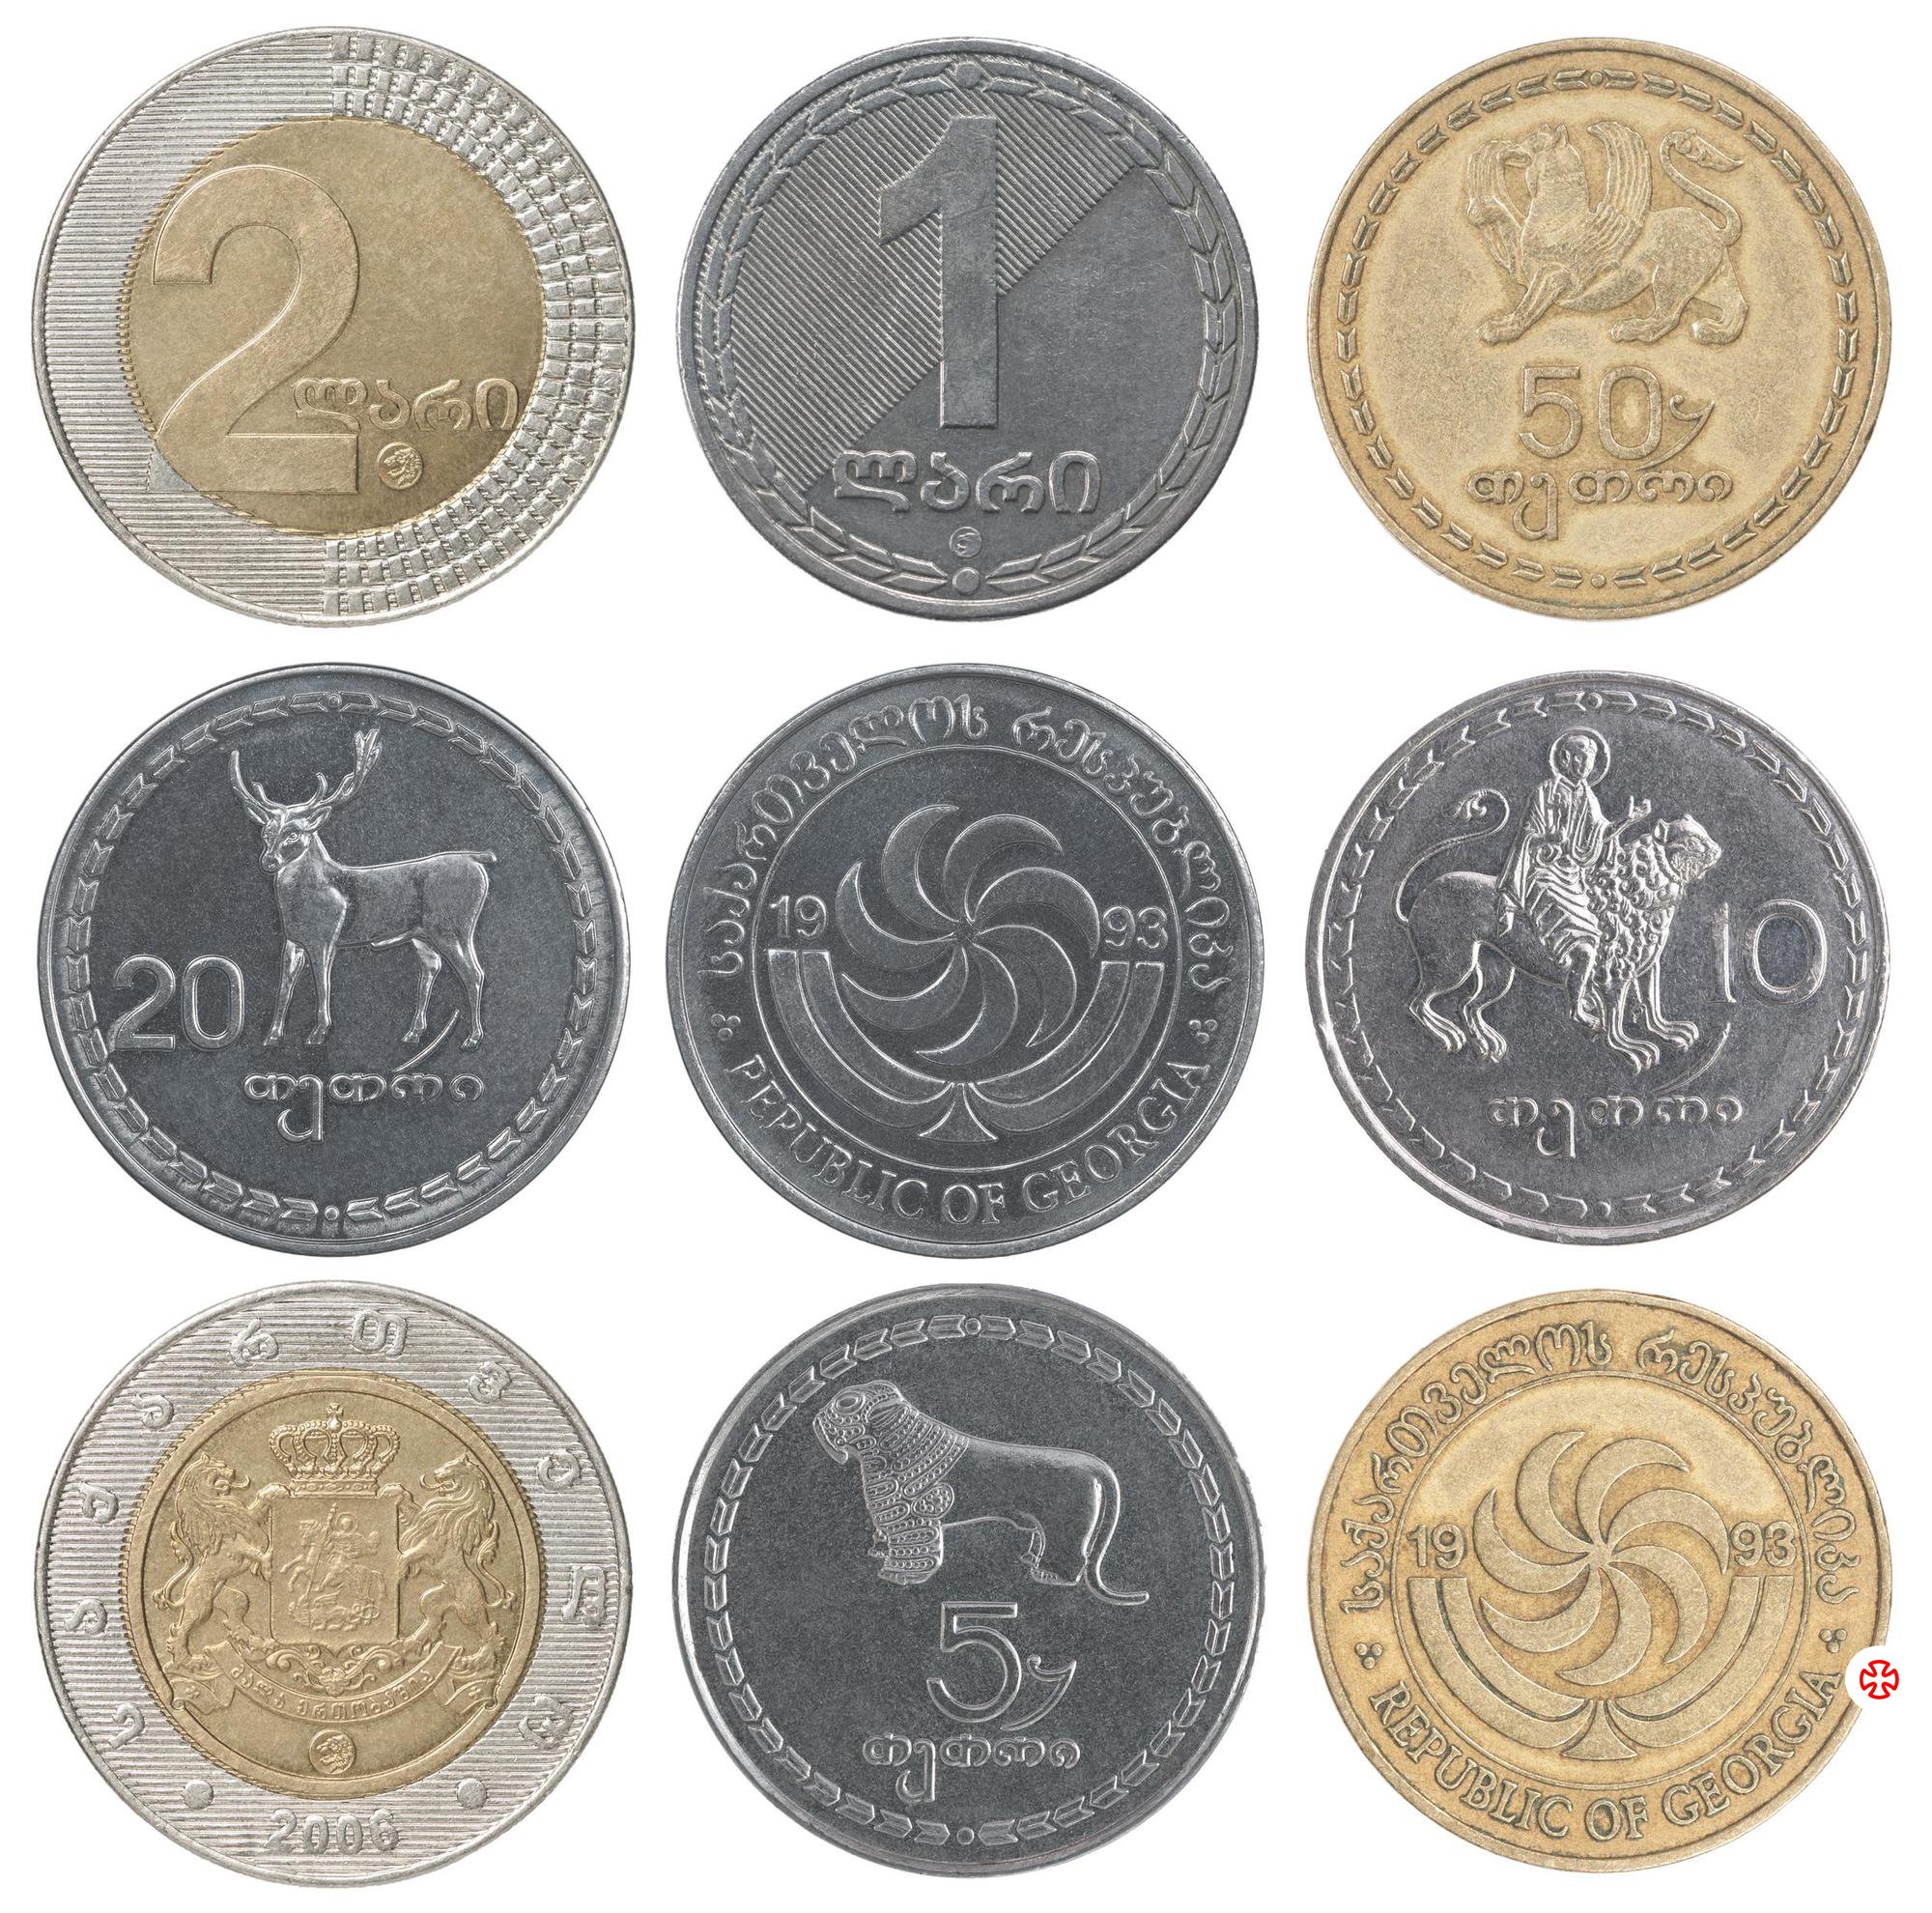 A complete set of Georgian coins